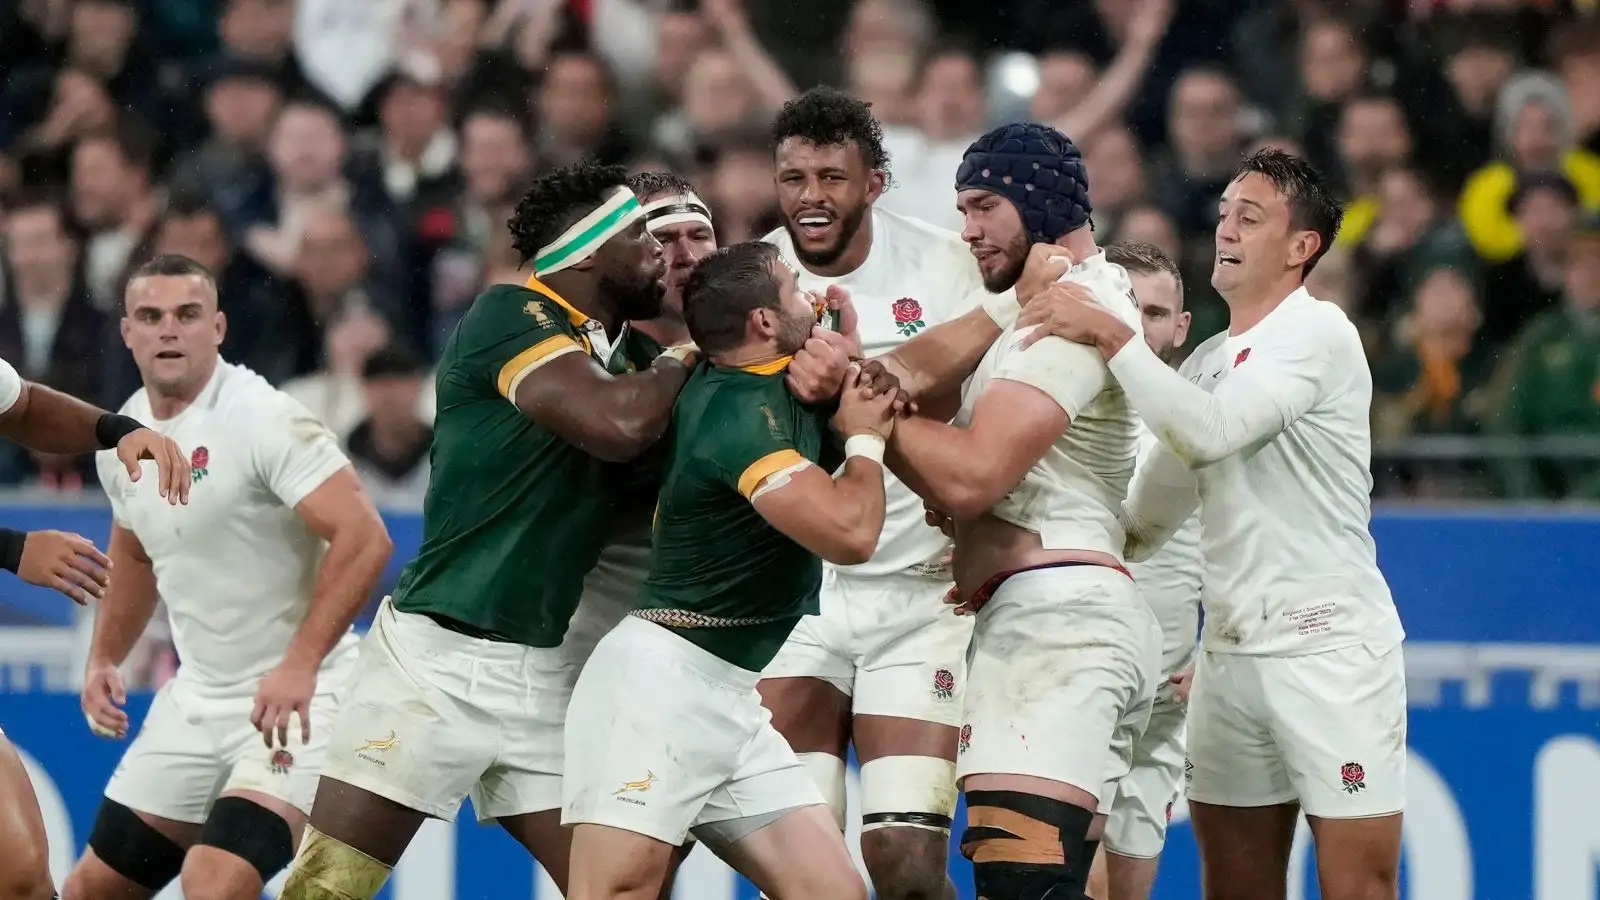 Teammates separate England's George Martin and South Africa's Cobus Reinach as they scuffle during the Rugby World Cup semifinal match between England and South Africa